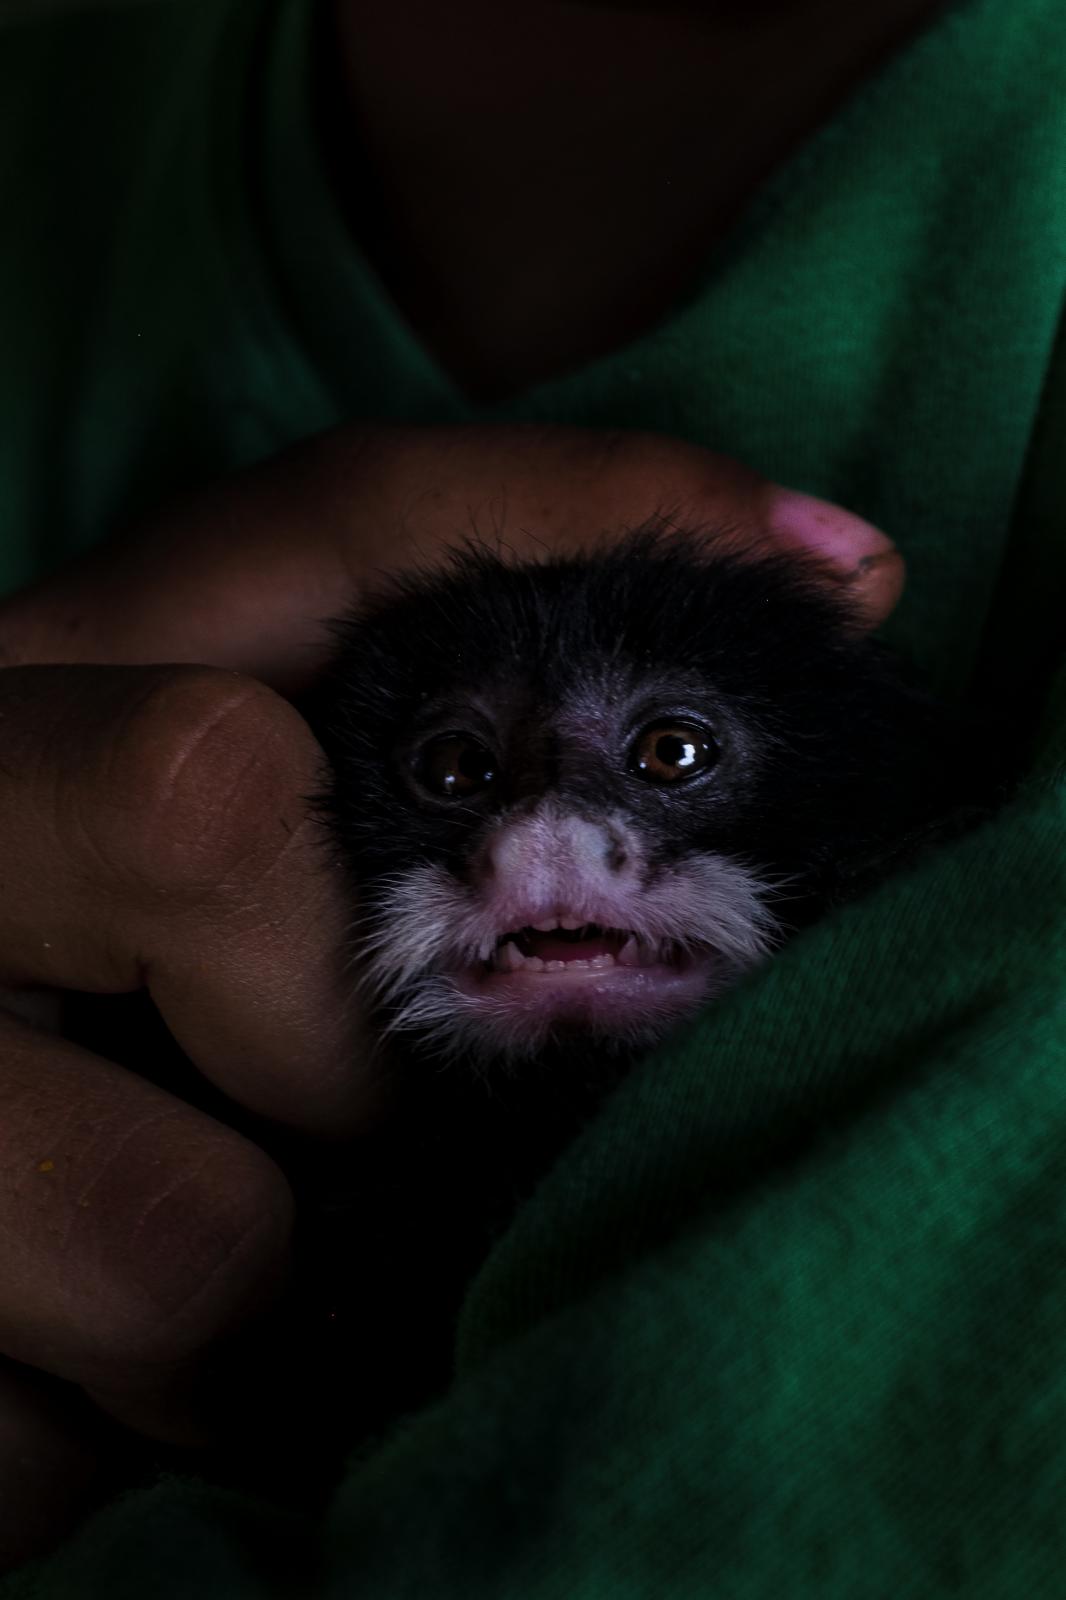 Amazonas l - A boy carries a baby monkey that was taken from its...